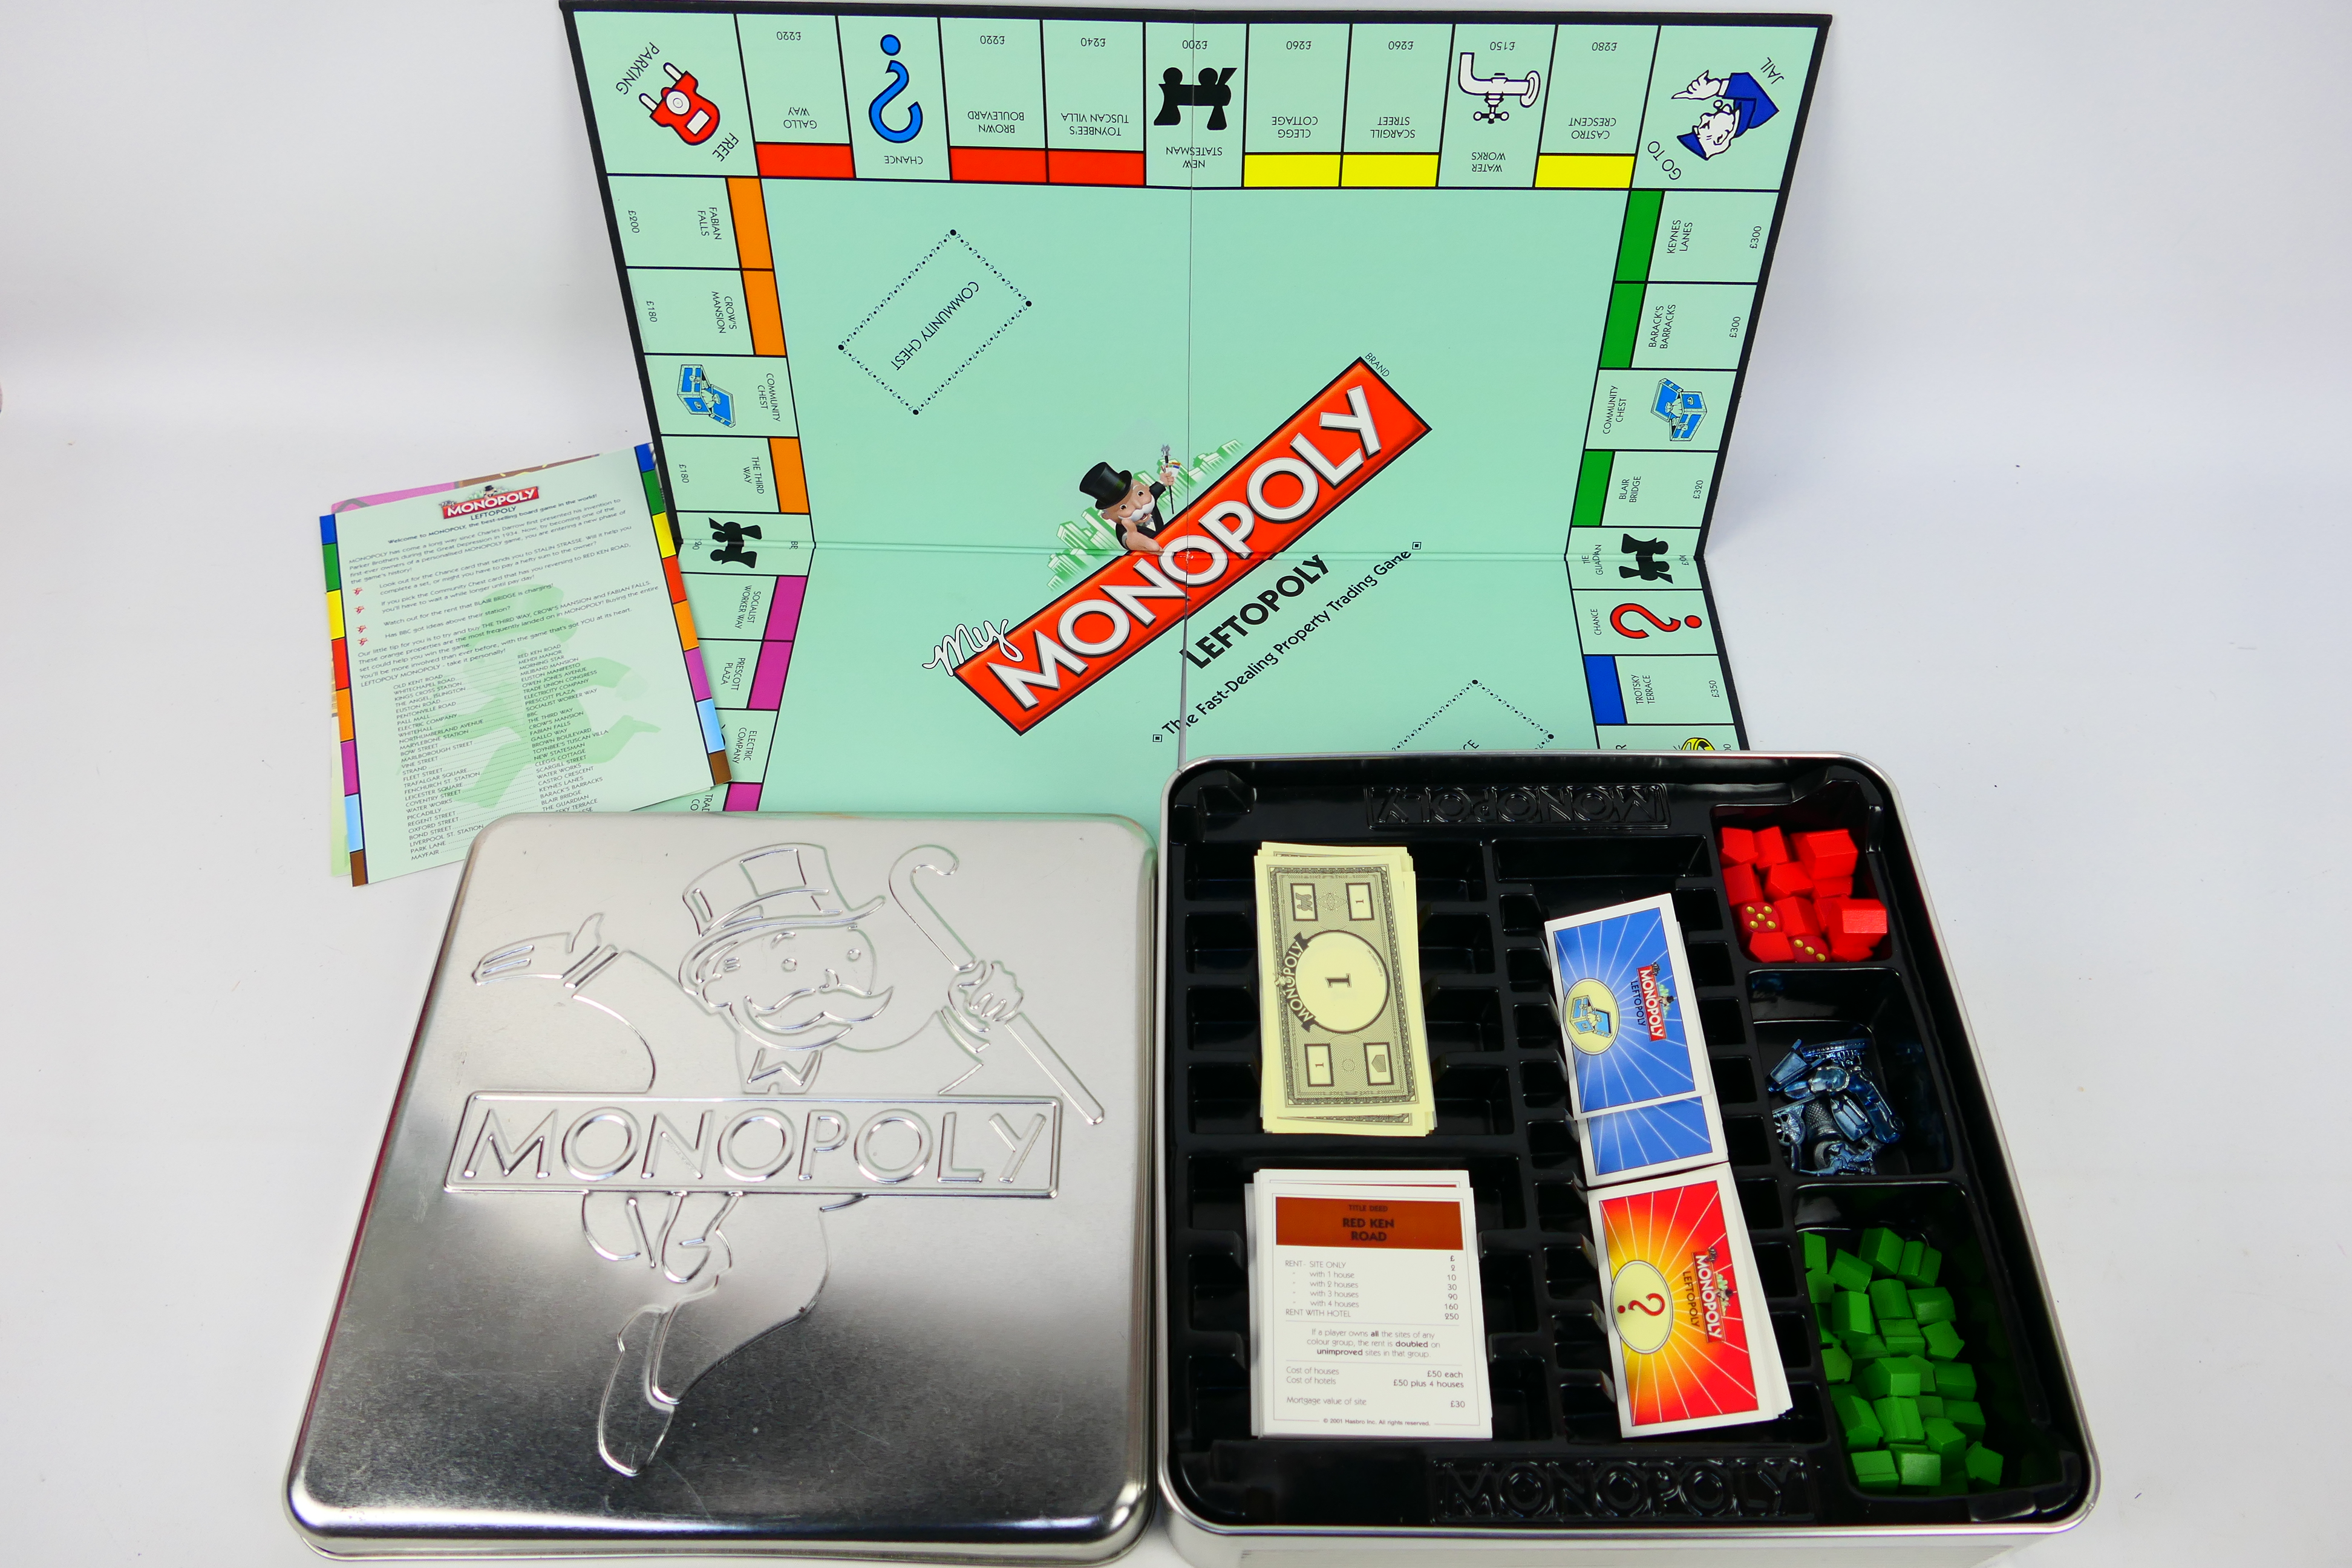 Monopoly - A rare personalised Monopoly game specially made by Hasbro for a British political